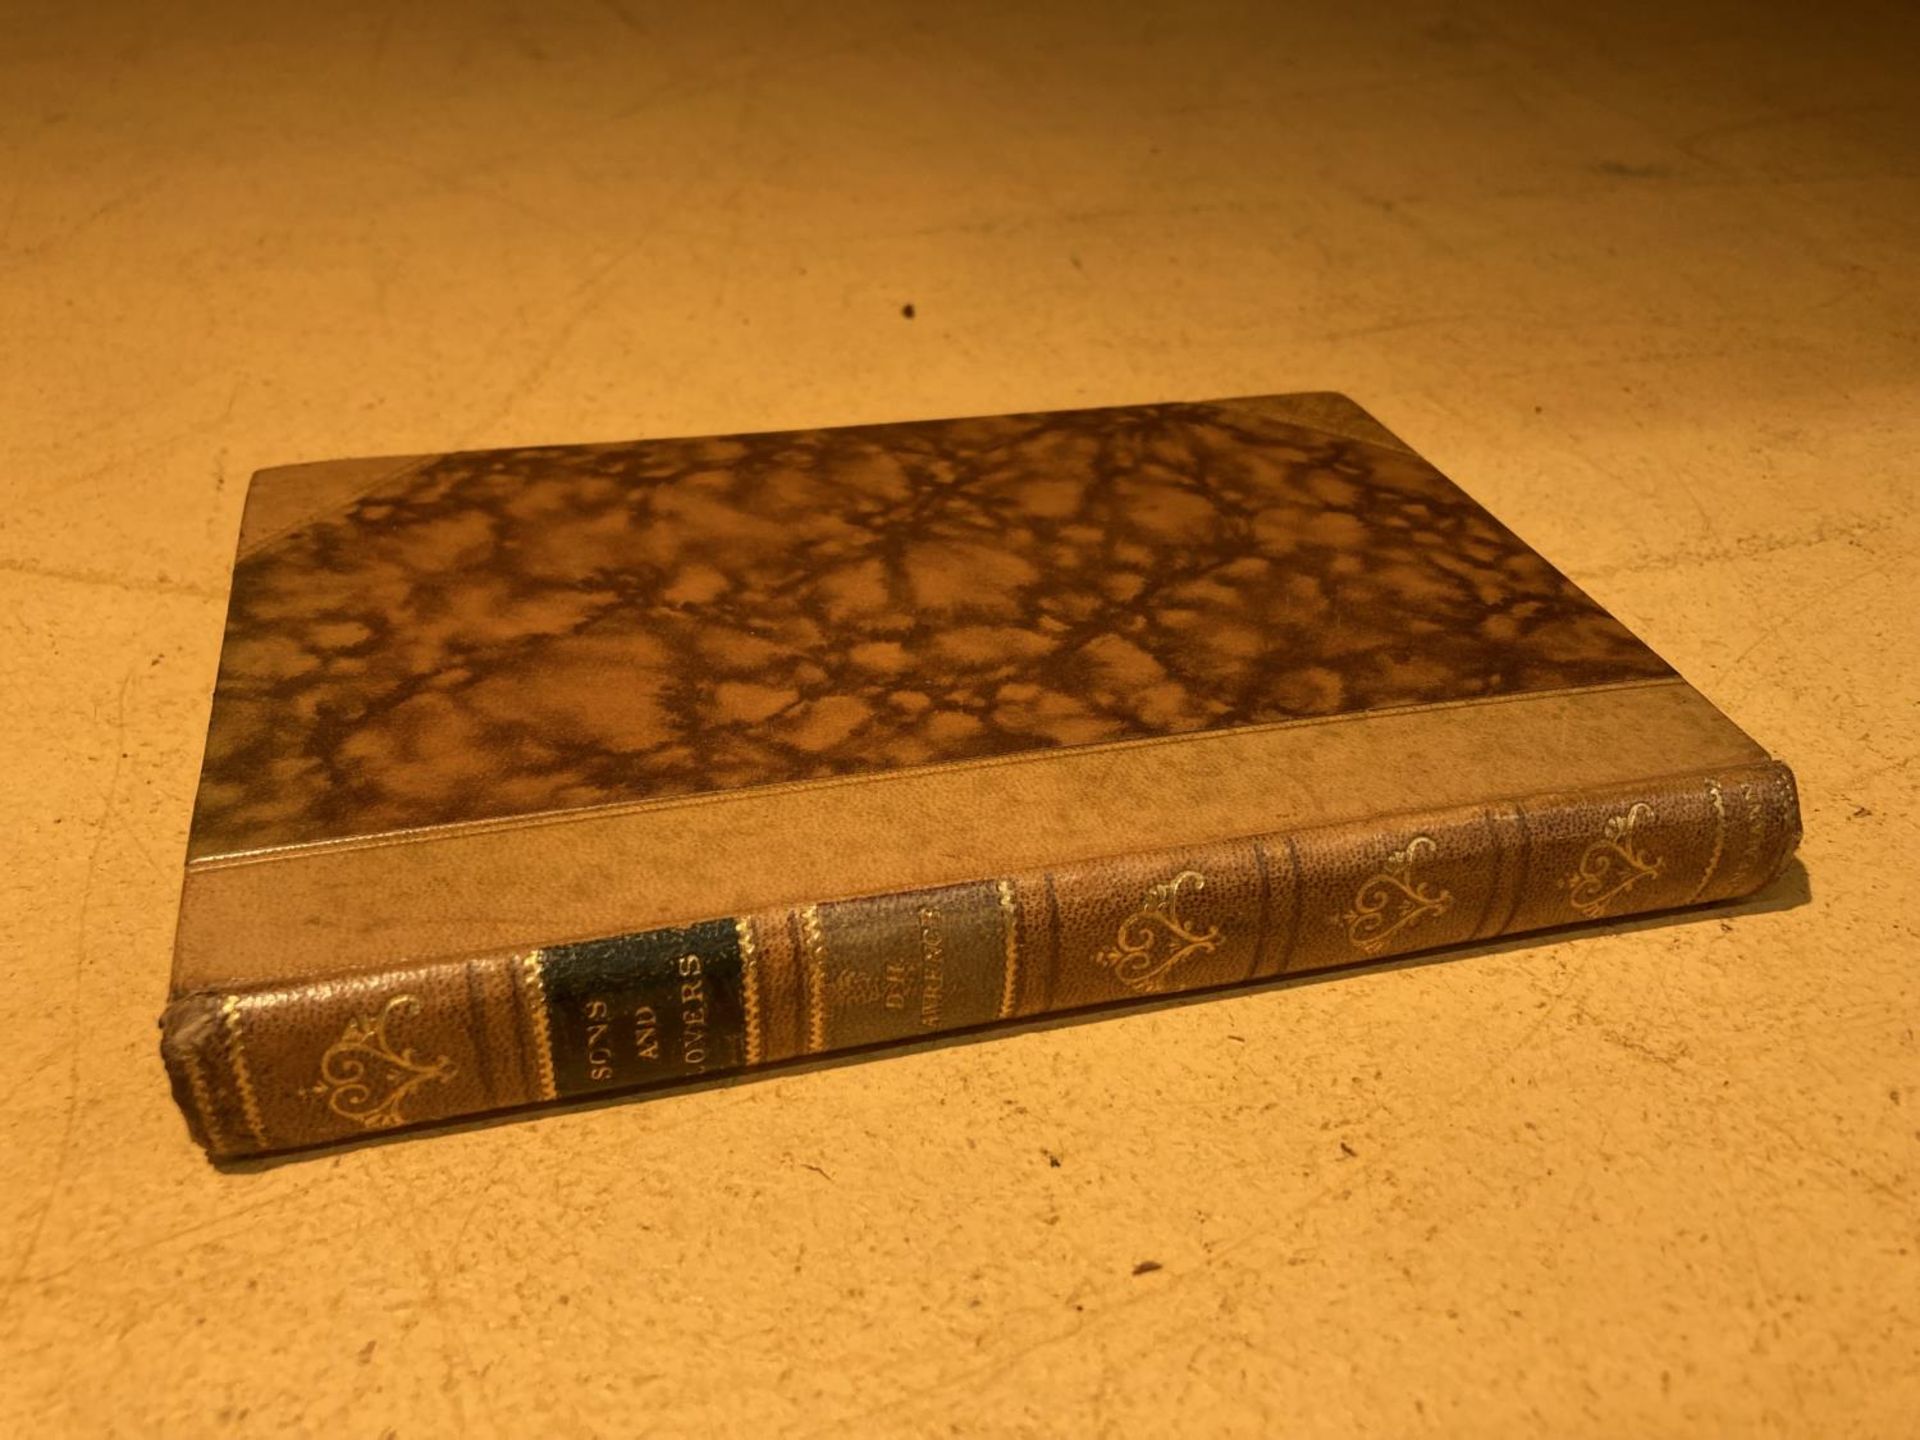 A LEATHER BOUND EDITION OF SONS AND DAUGHTERS - D H LAWRENCE - 1935 - GILT TOP EDGED